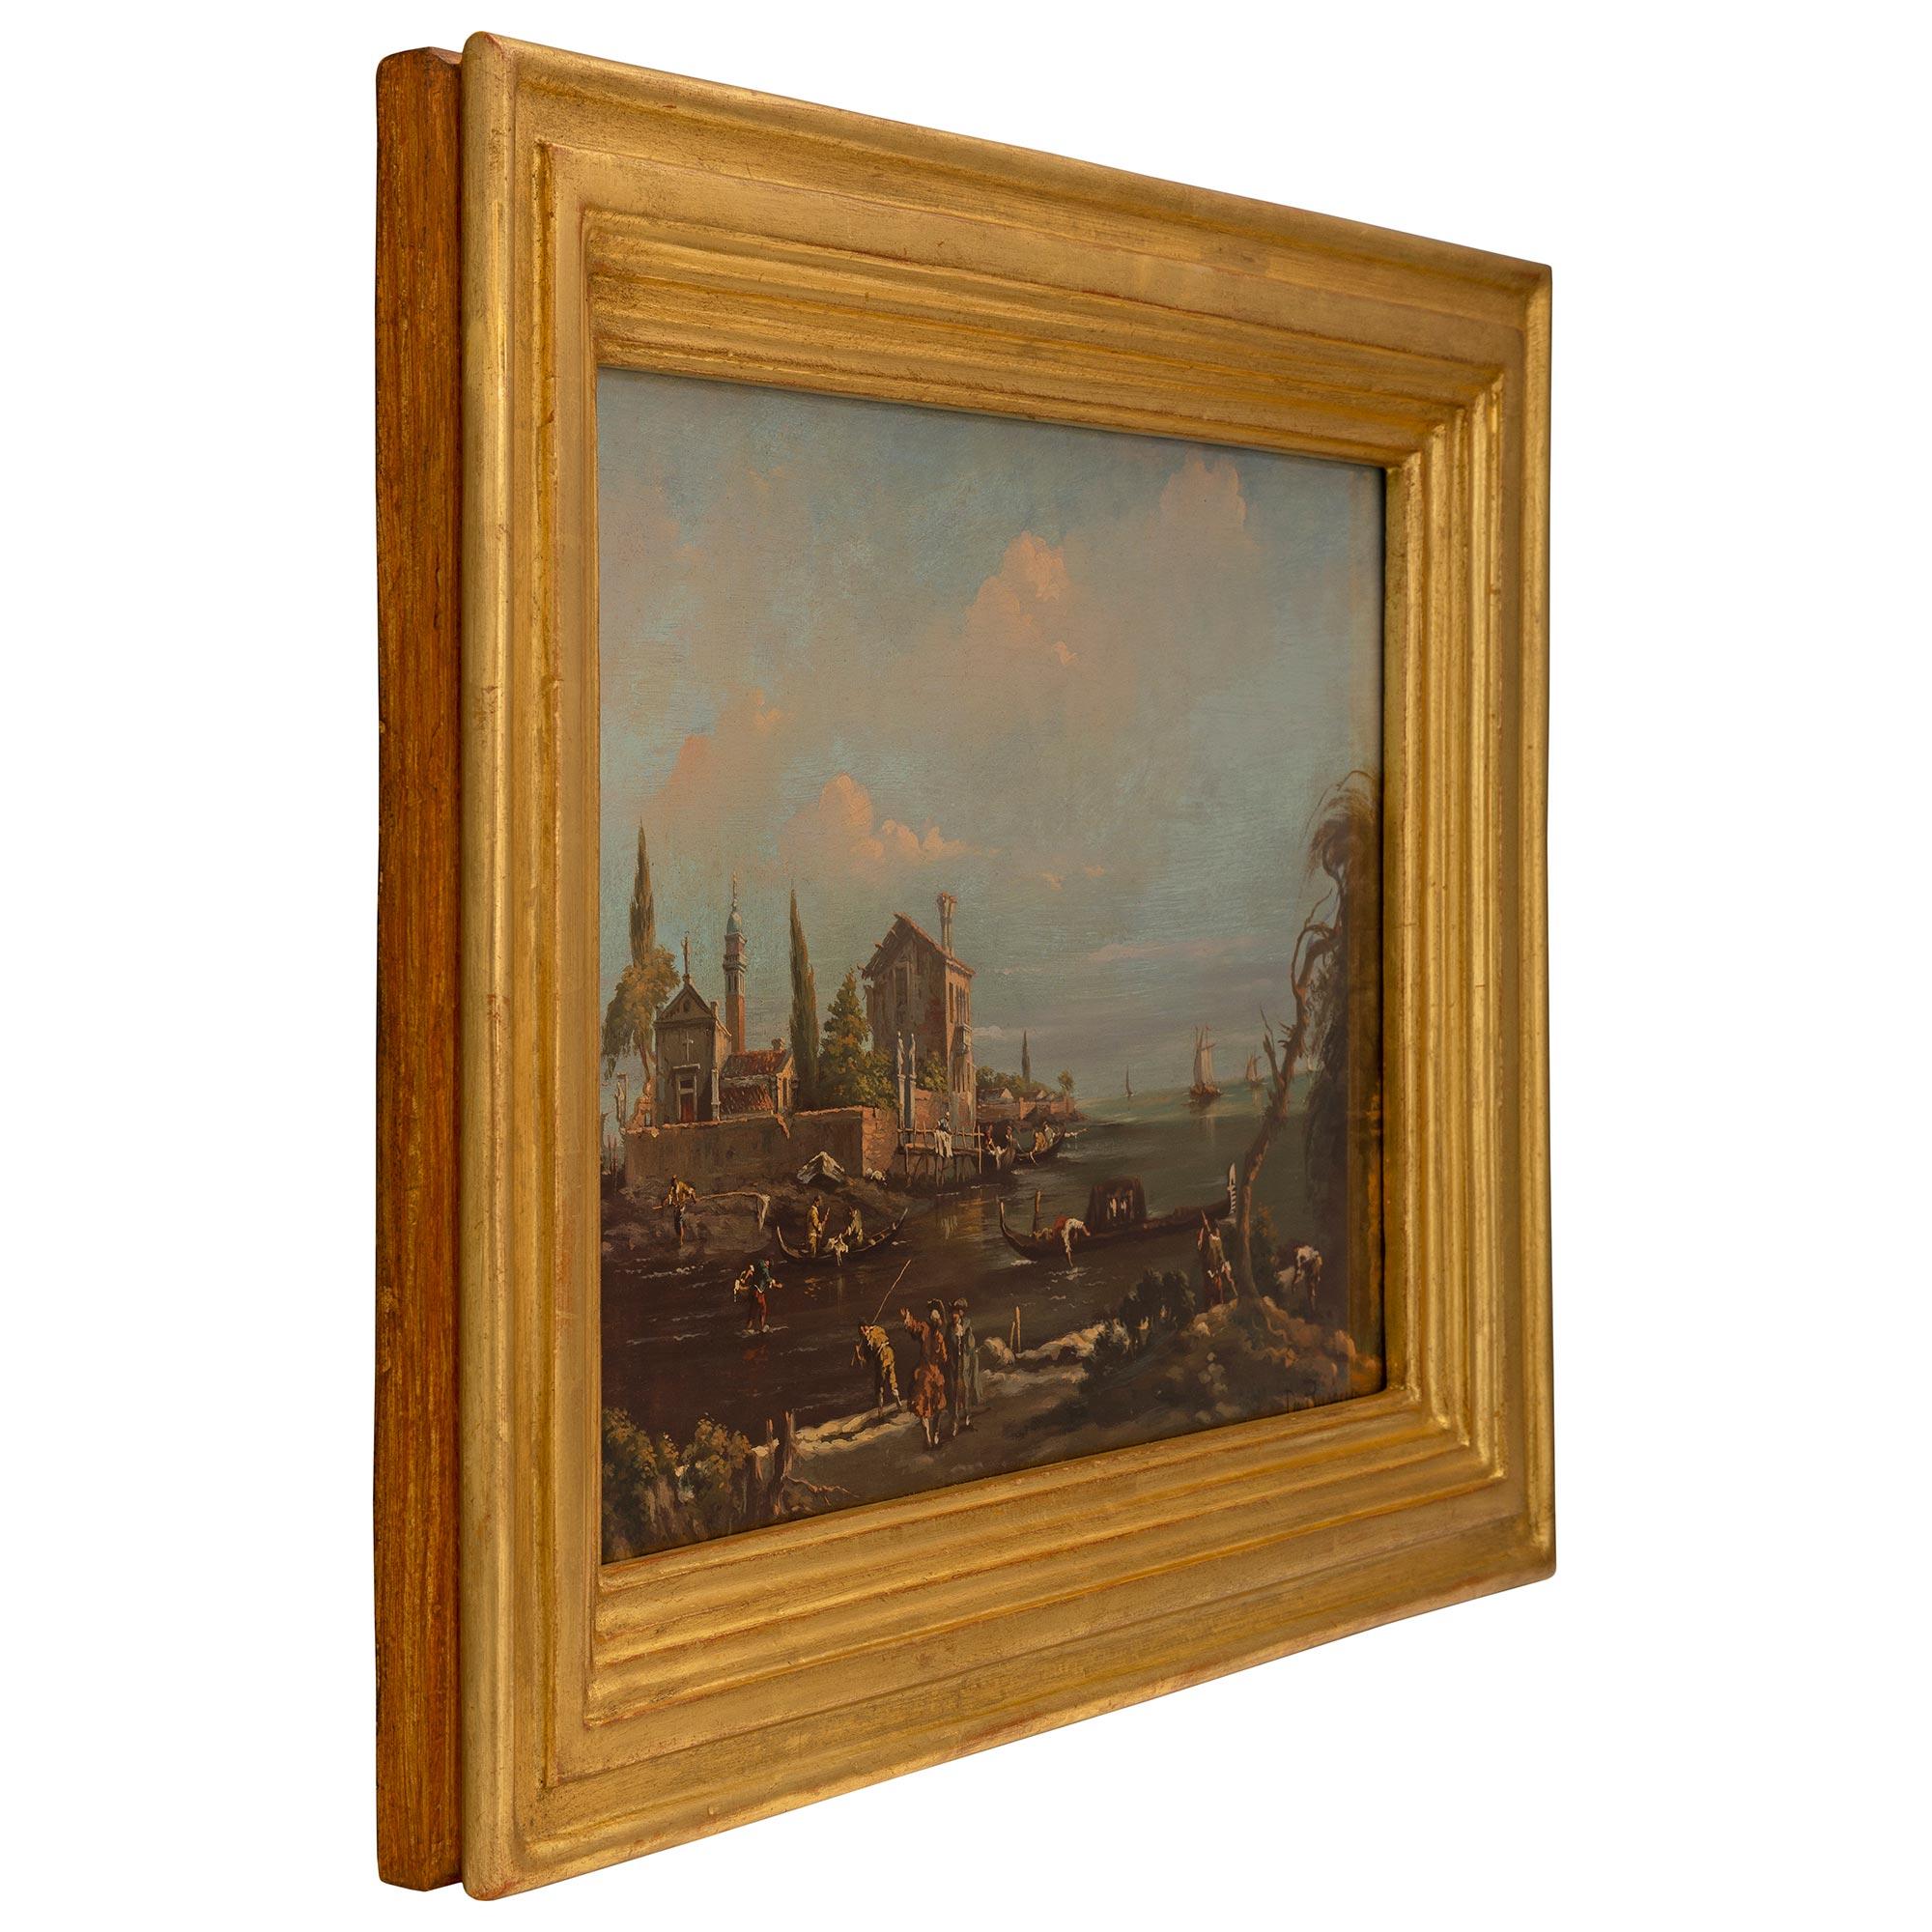 A beautiful Italian 19th century oil on canvas painting. The painting depicts a beautiful Italian scene of personages going about their day with charming boats and a house on the water. The painting is set in an elegant stepped mottled giltwood